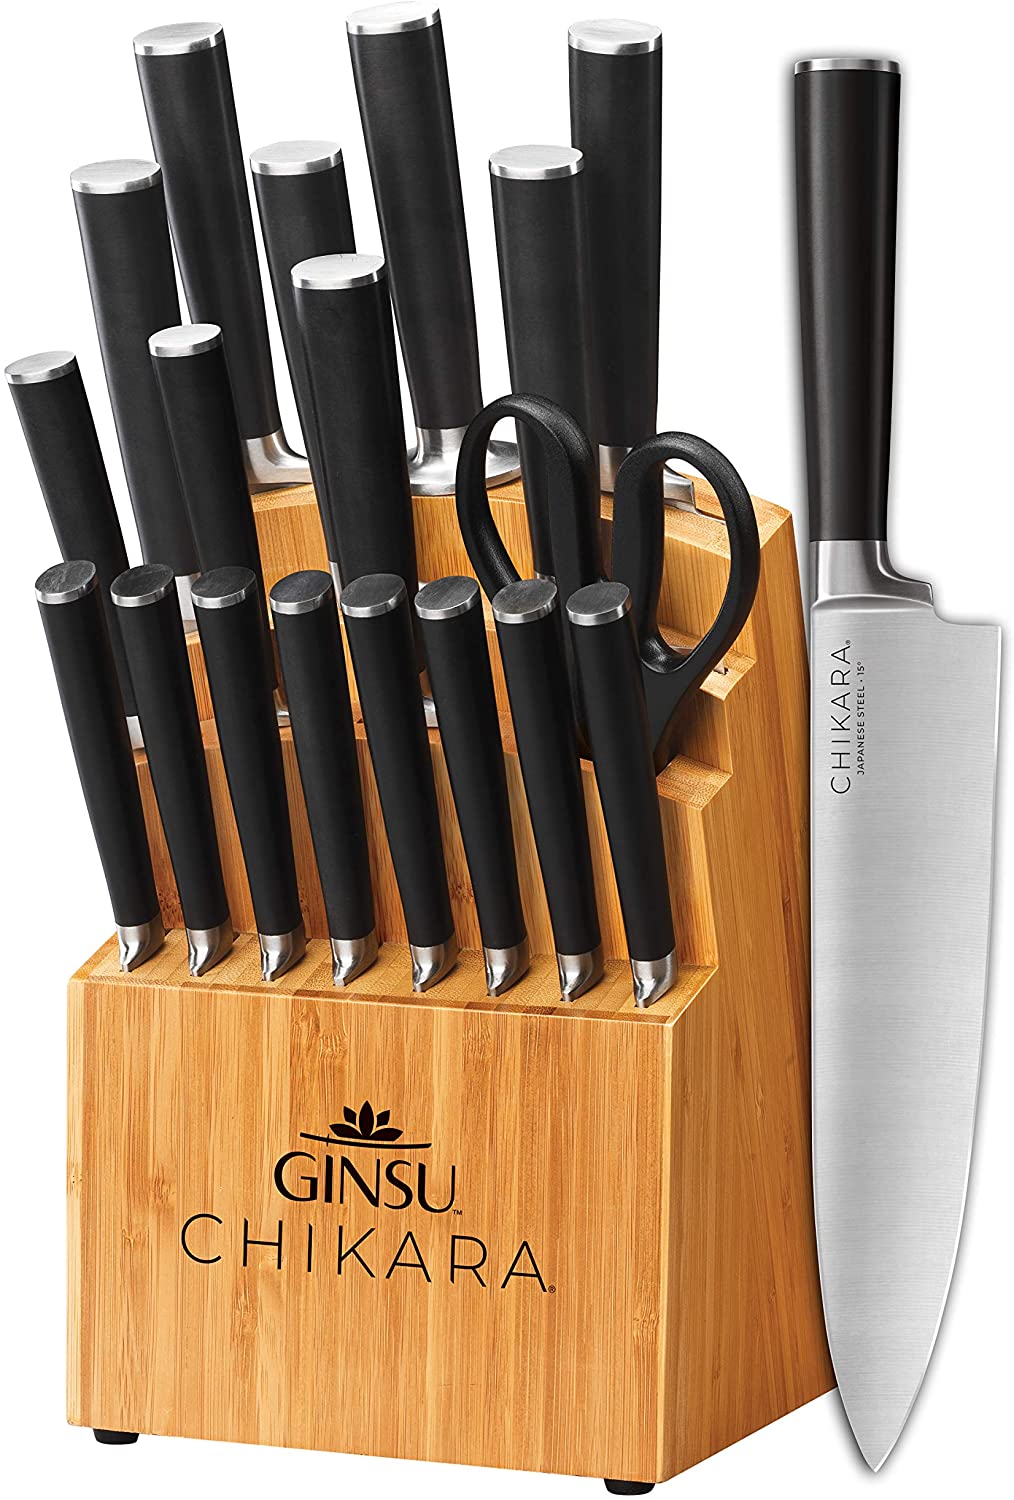 Chicago Cutlery® Insignia Classic 18-piece Block Set with Built-in Sharpener  - Runnings